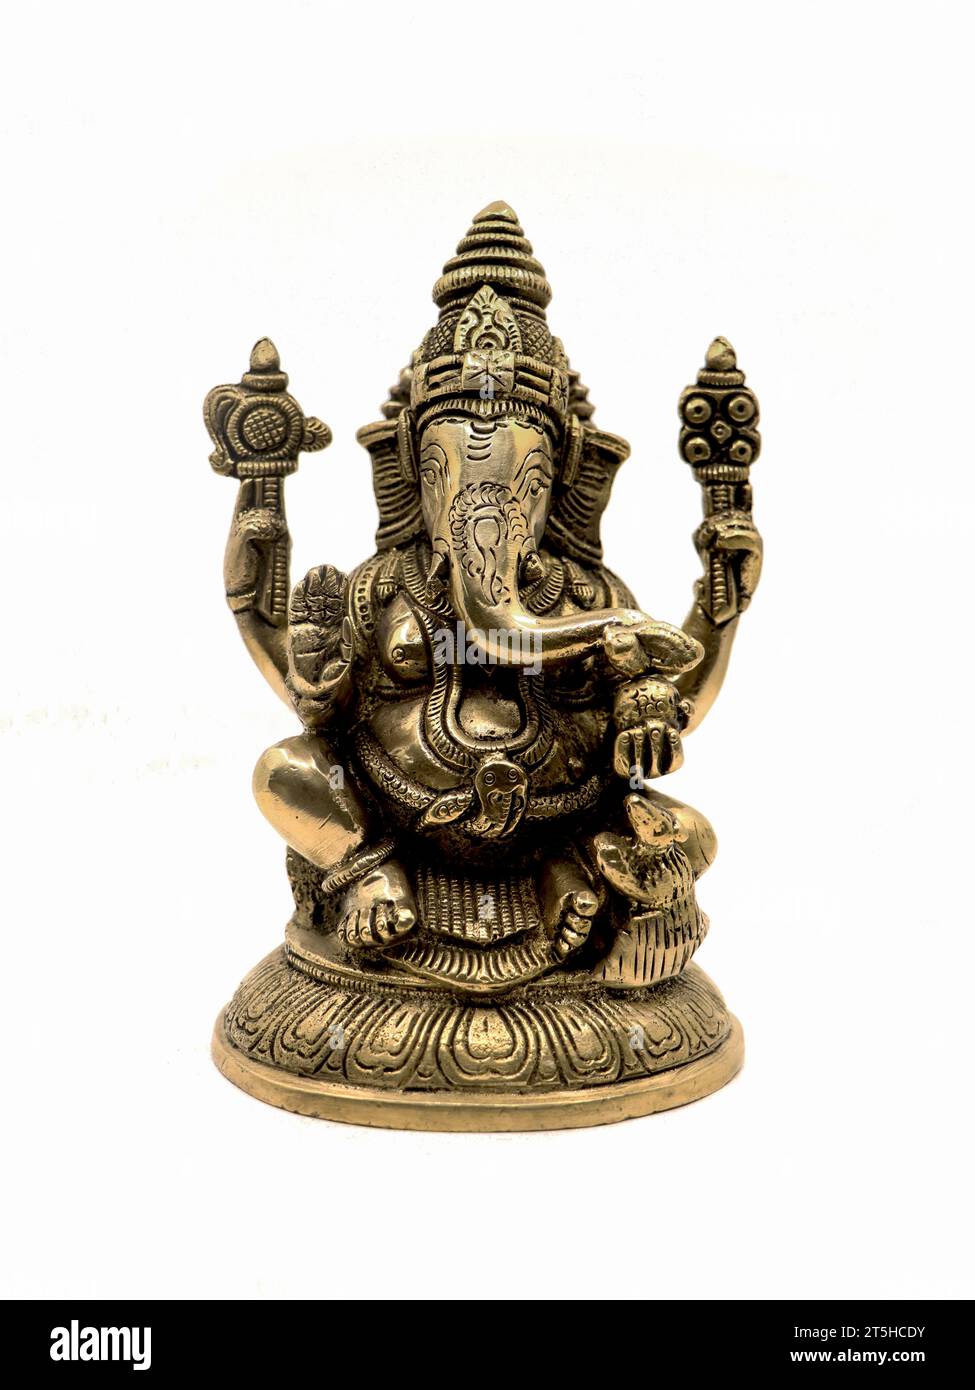 front view of sitting ganesh with four hands, brass statue with intricate details and decorative carvings isolated in a white background Stock Photo